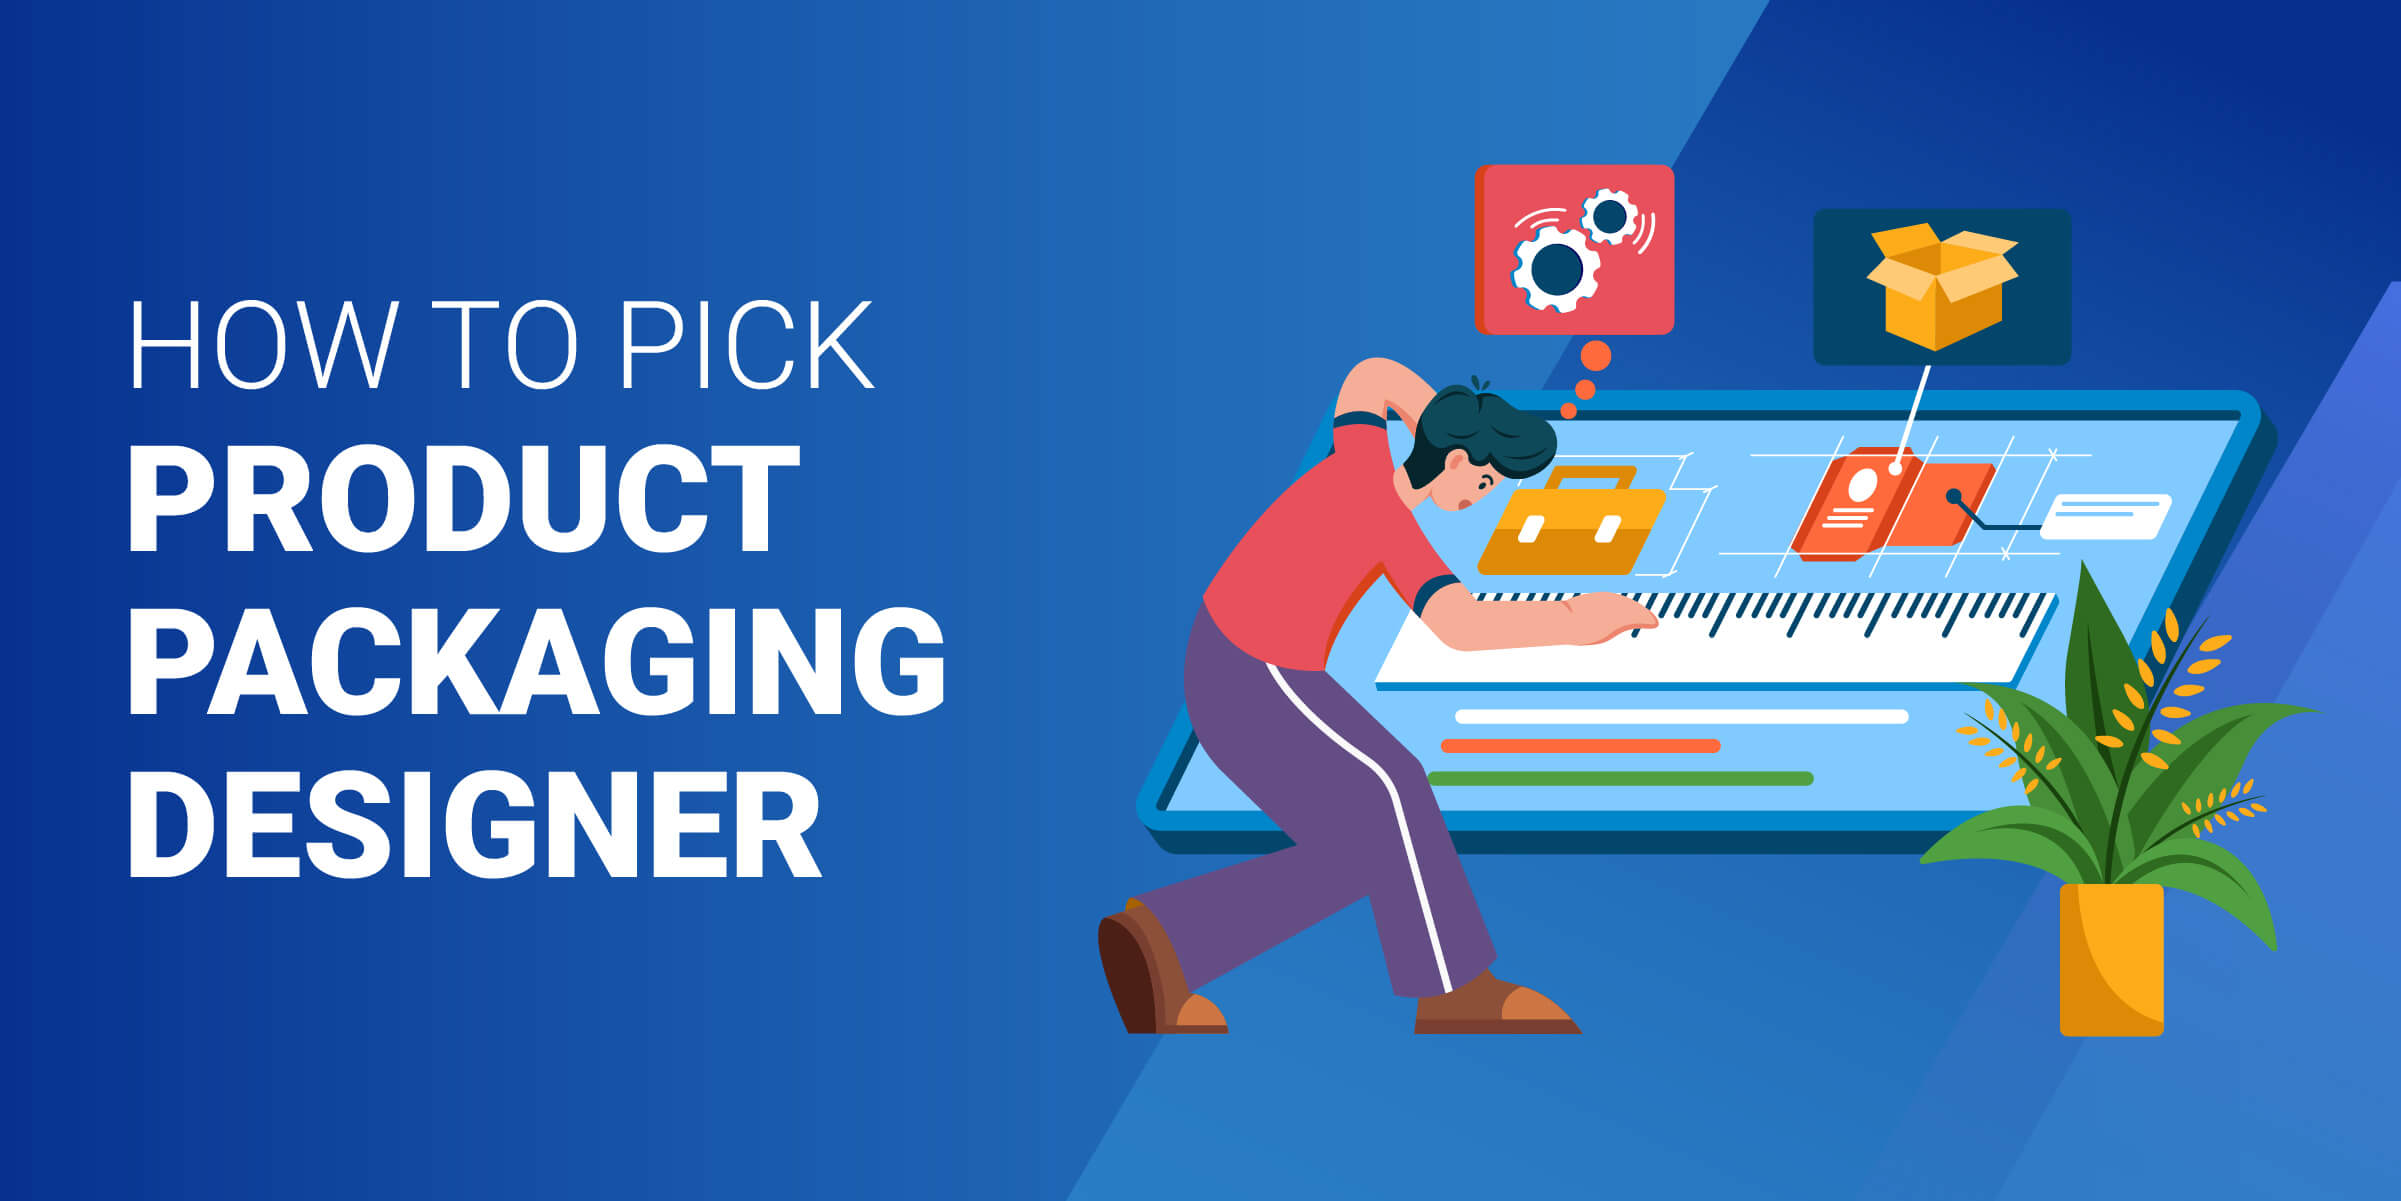 How to Pick Product Package Designer